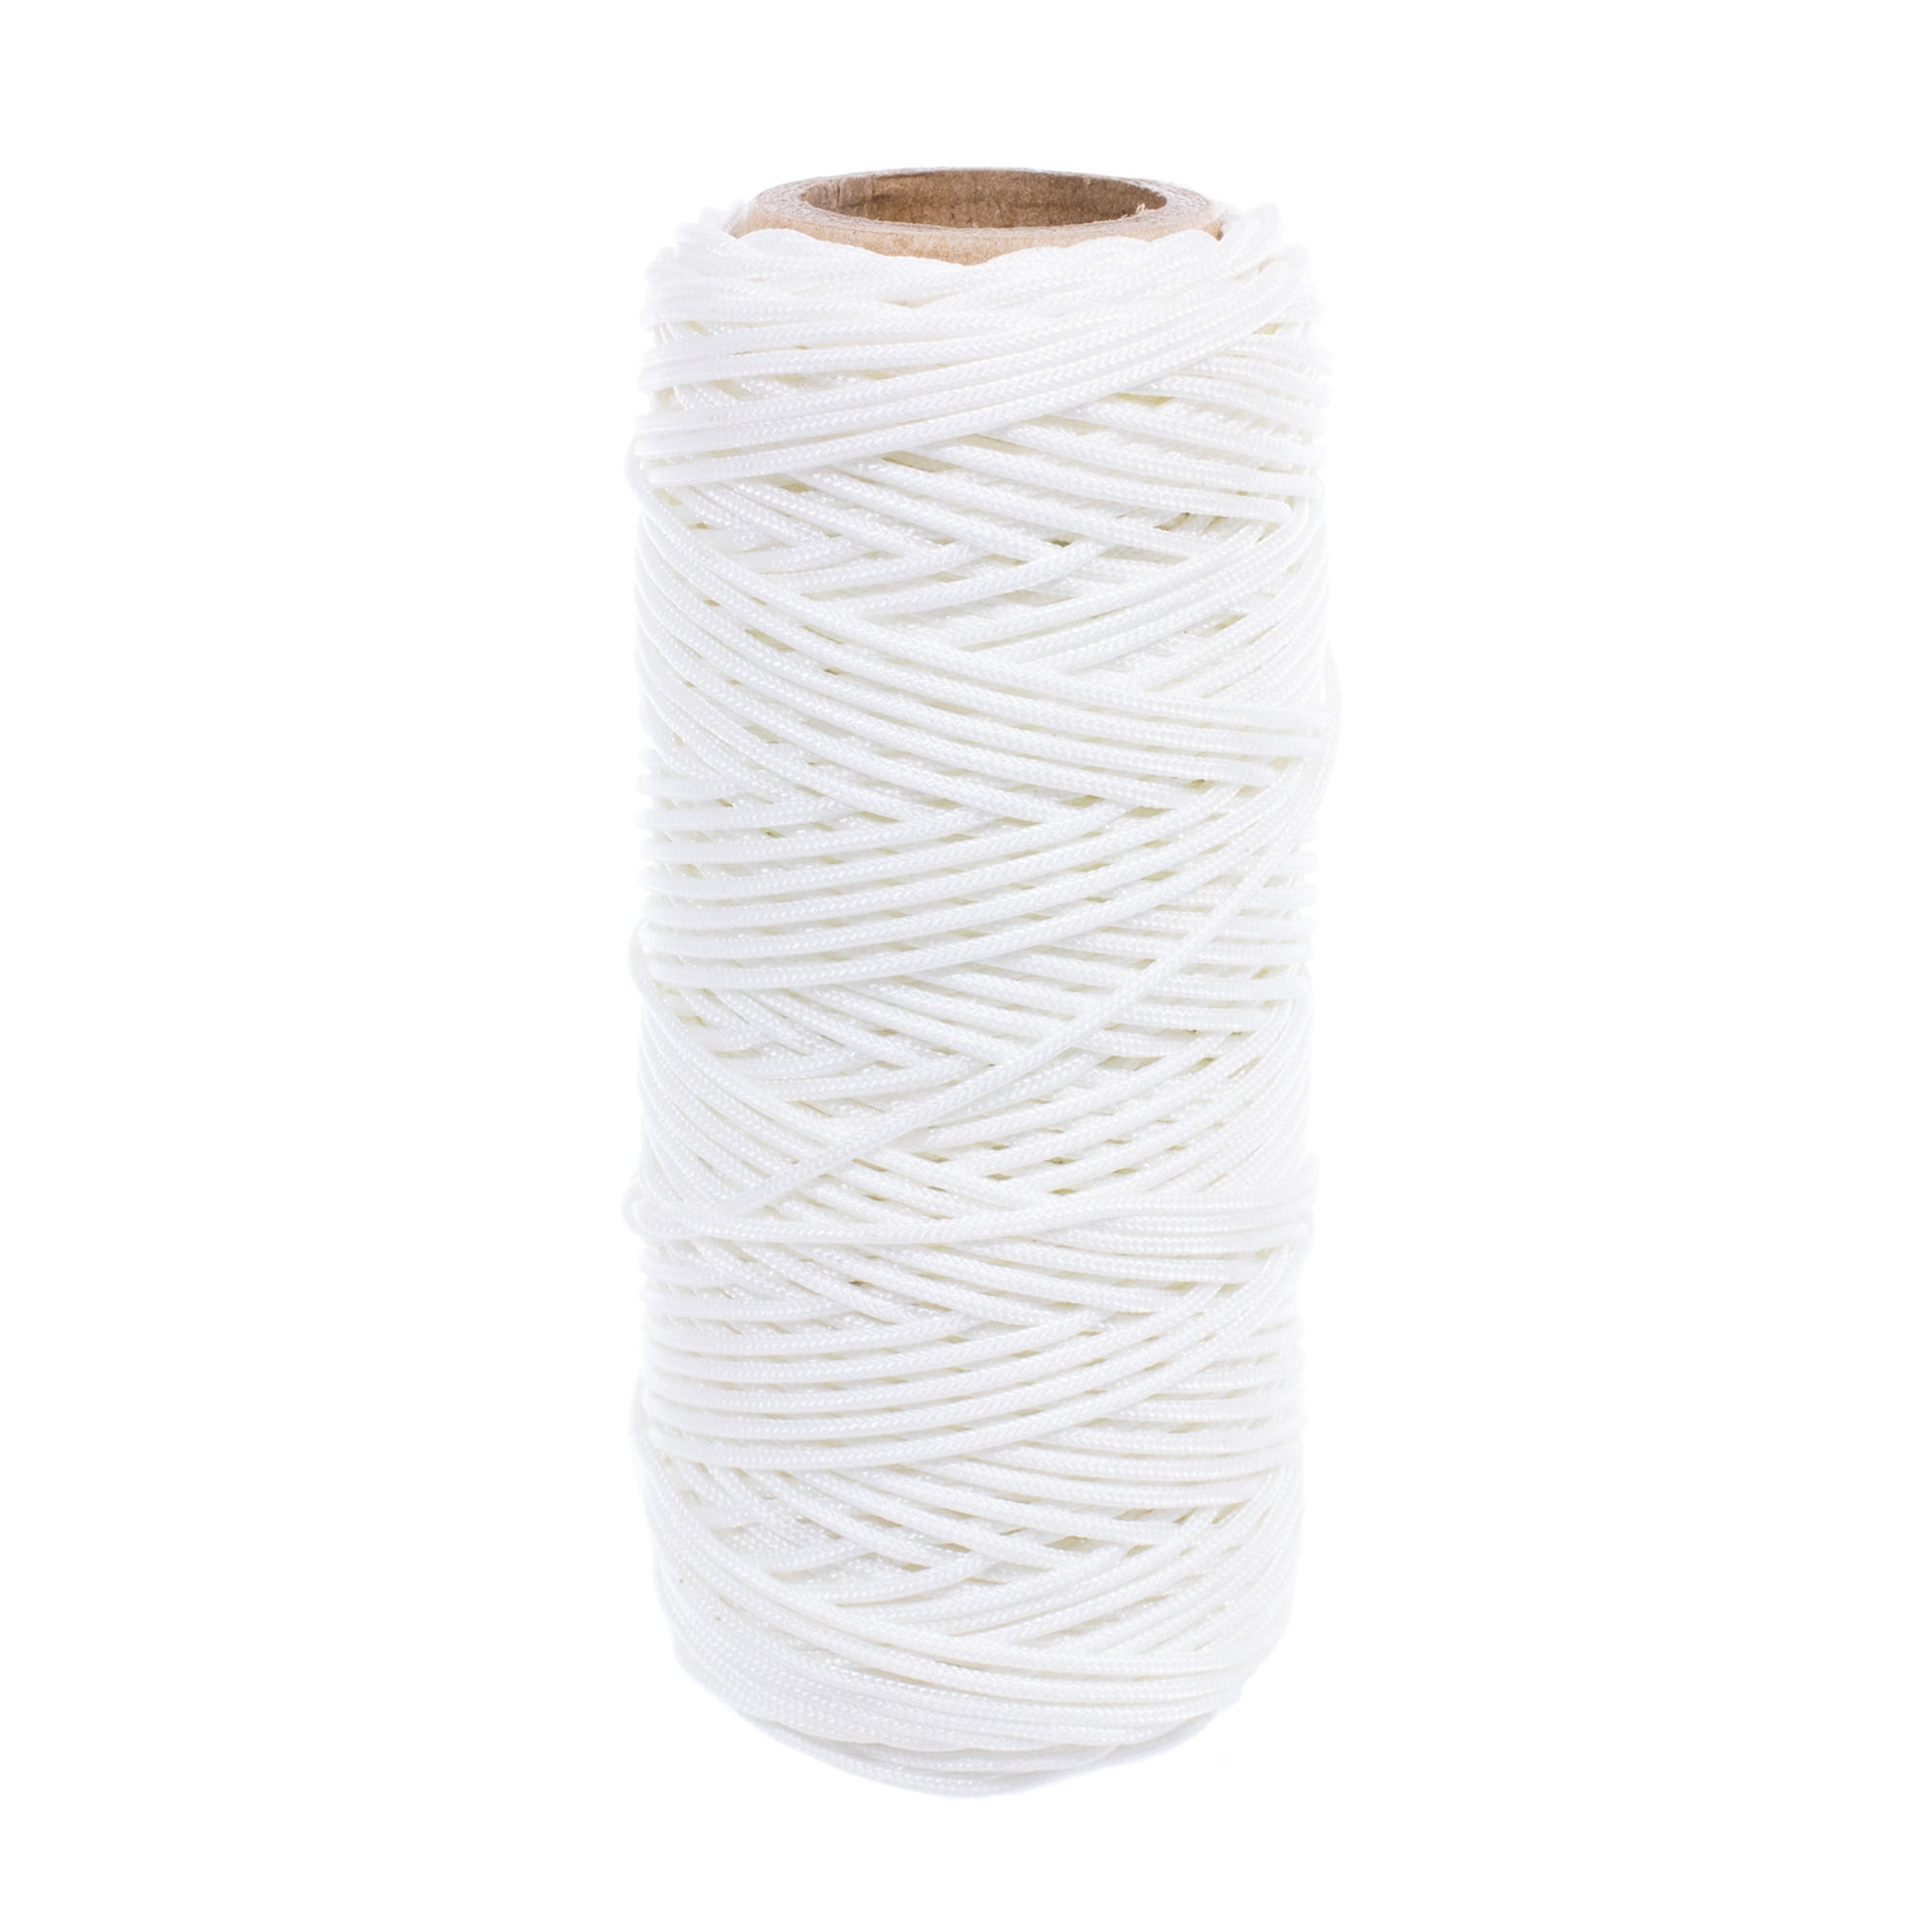 West Coast Paracord Braided Polyester Mini Blind Cord in White - 100%  Synthetic - 100 Feet Spool Tube